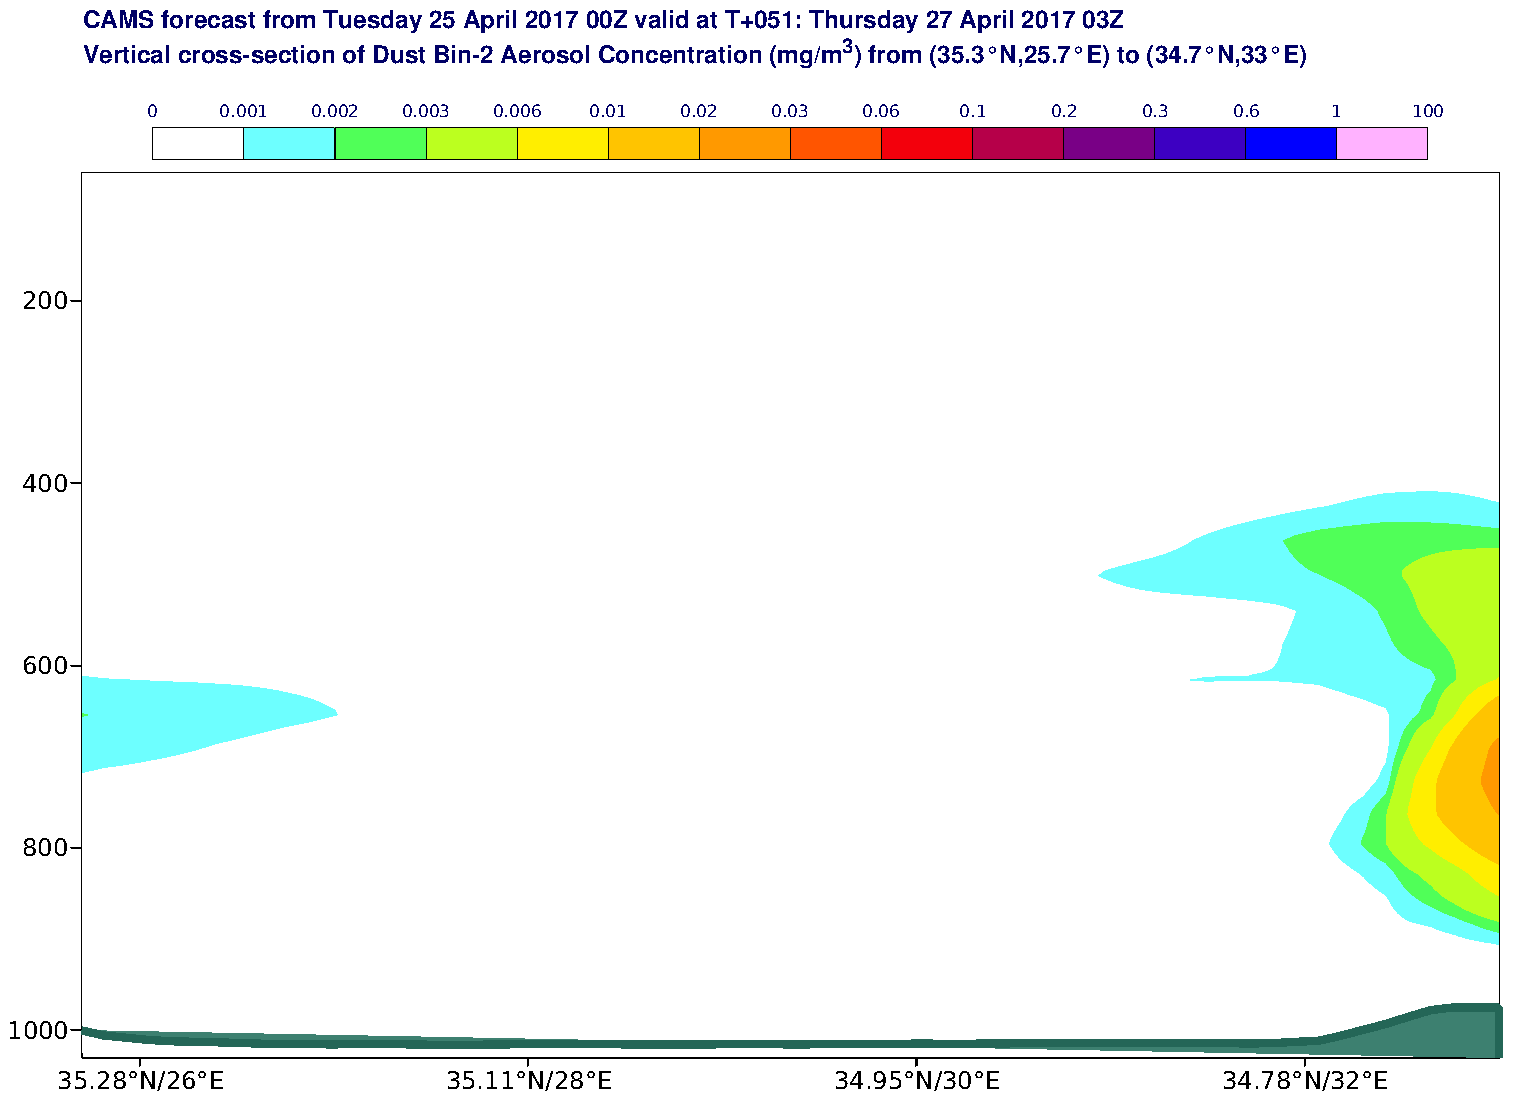 Vertical cross-section of Dust Bin-2 Aerosol Concentration (mg/m3) valid at T51 - 2017-04-27 03:00